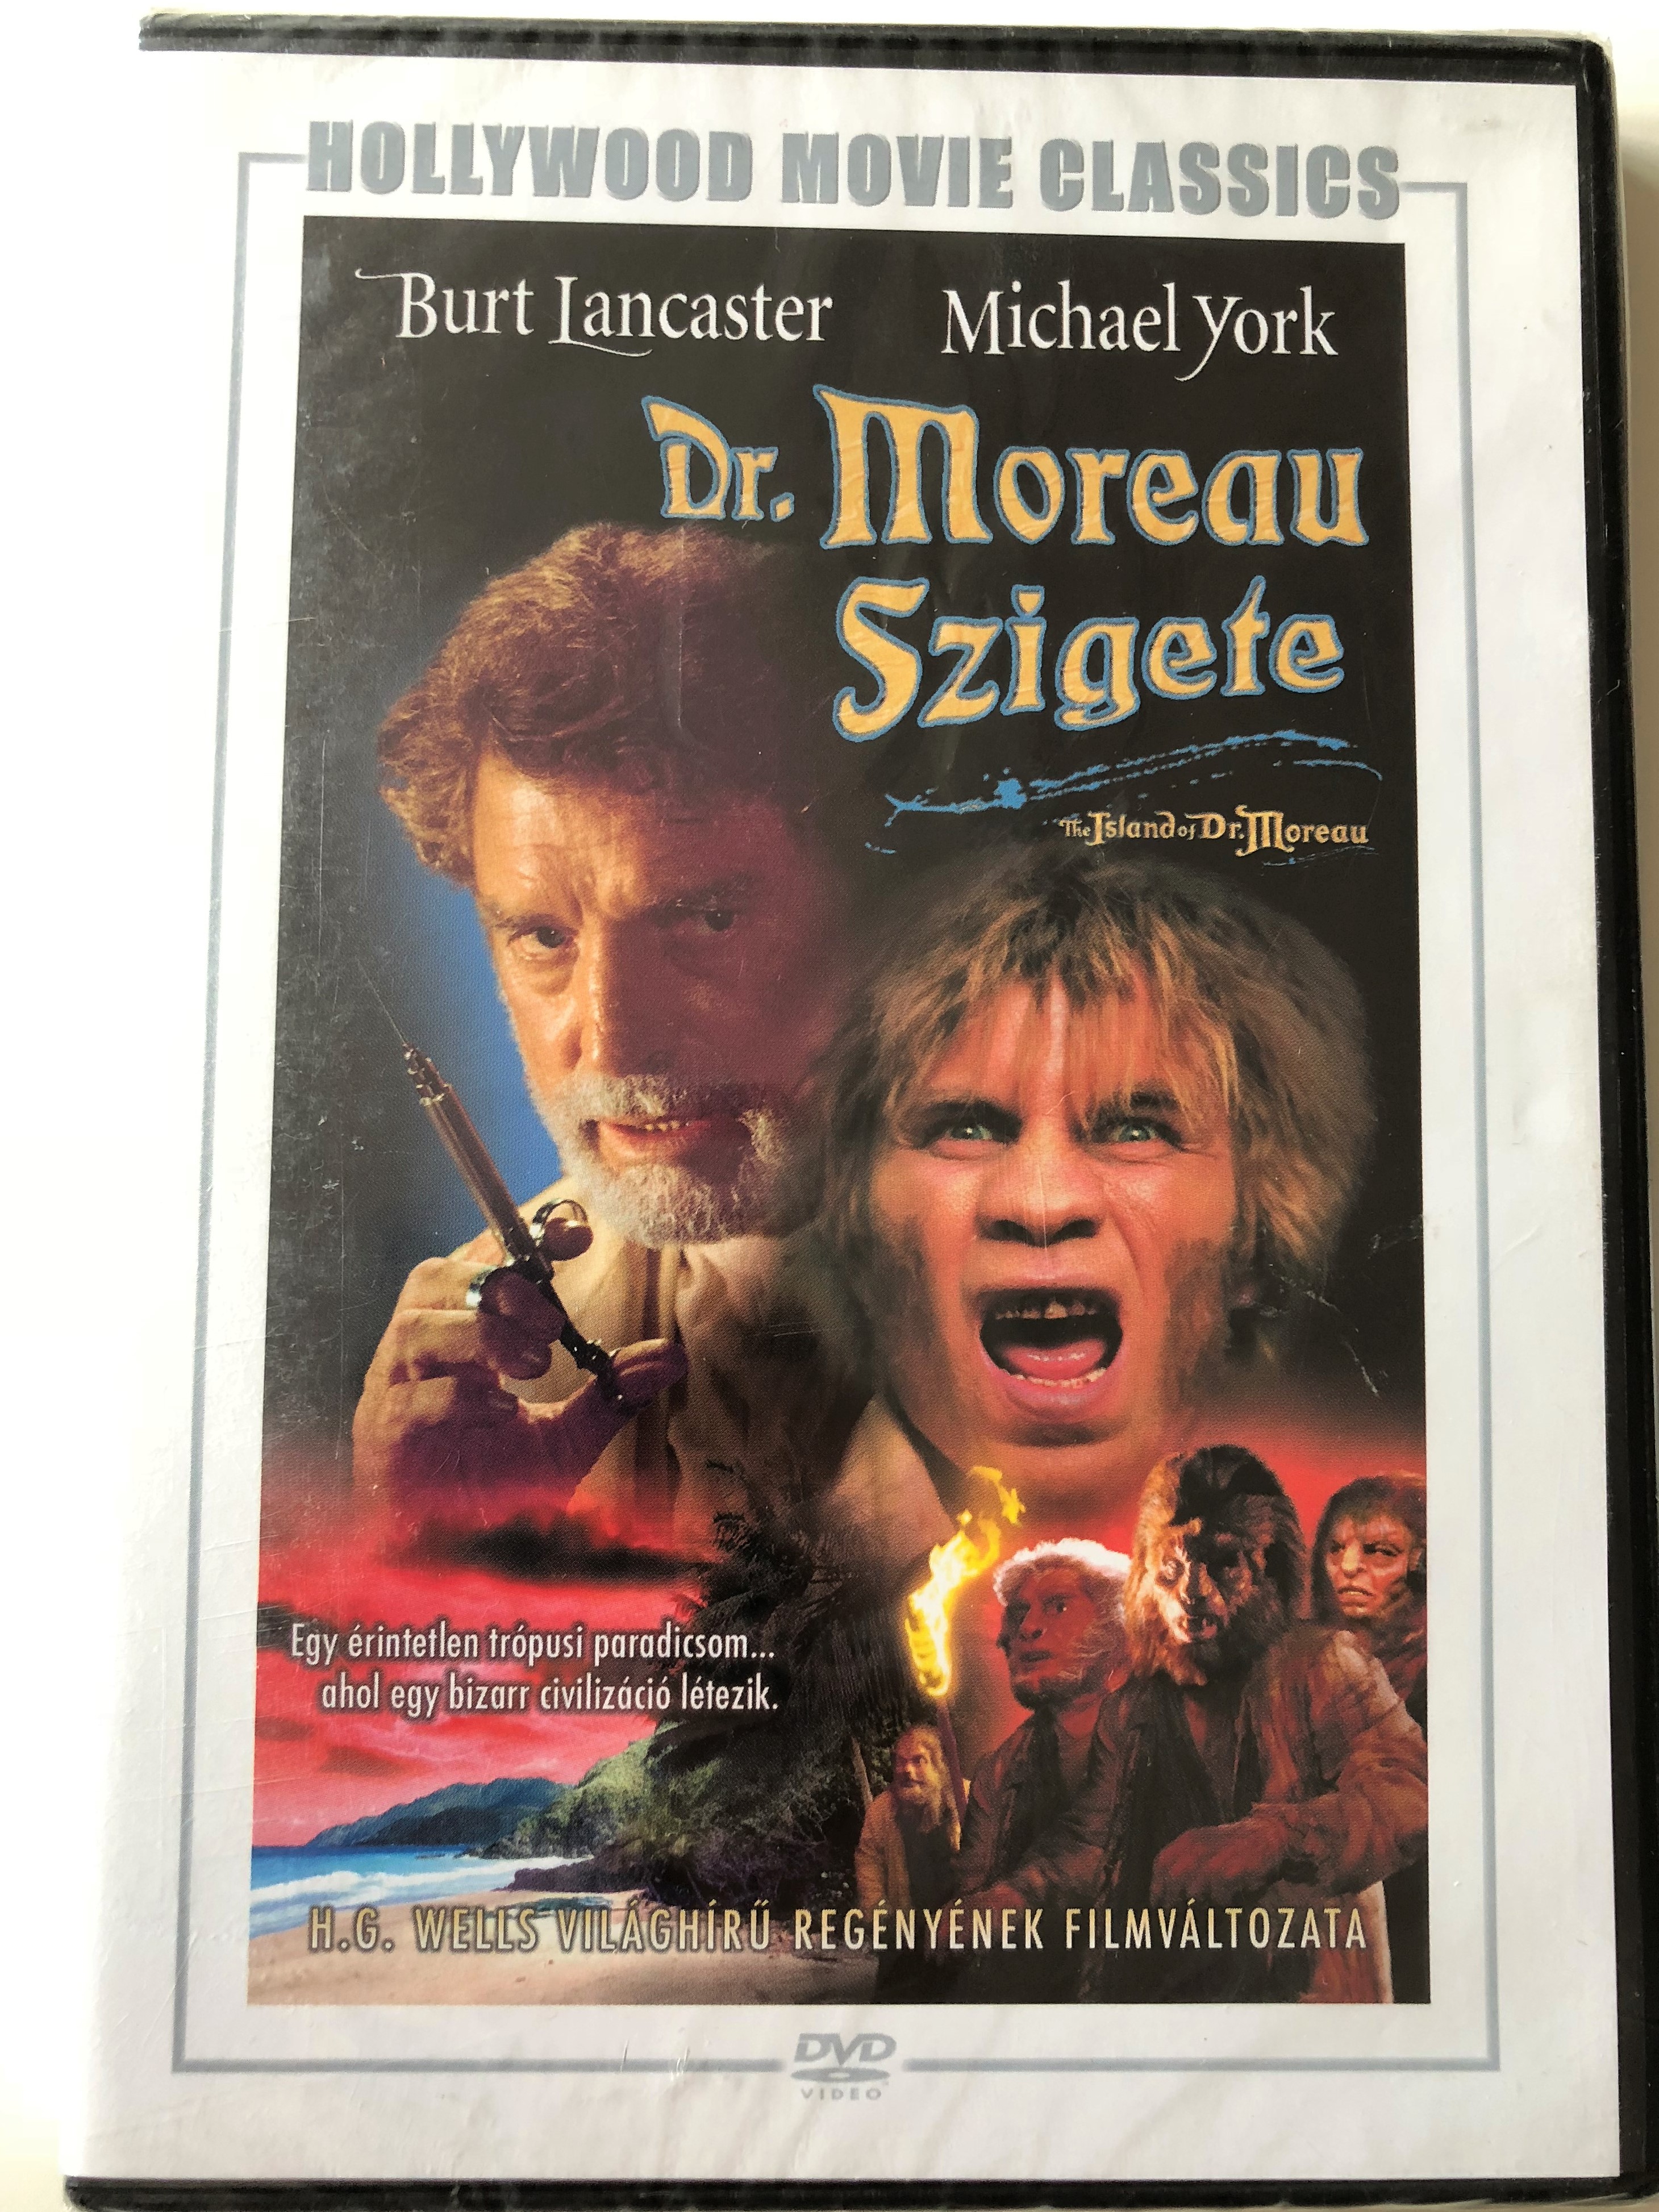 the-island-of-dr.-moreau-dvd-1977-dr.-moreau-szigete-directed-by-don-taylor-starring-burt-lancaster-michael-york-hollywood-movie-classics-1-.jpg